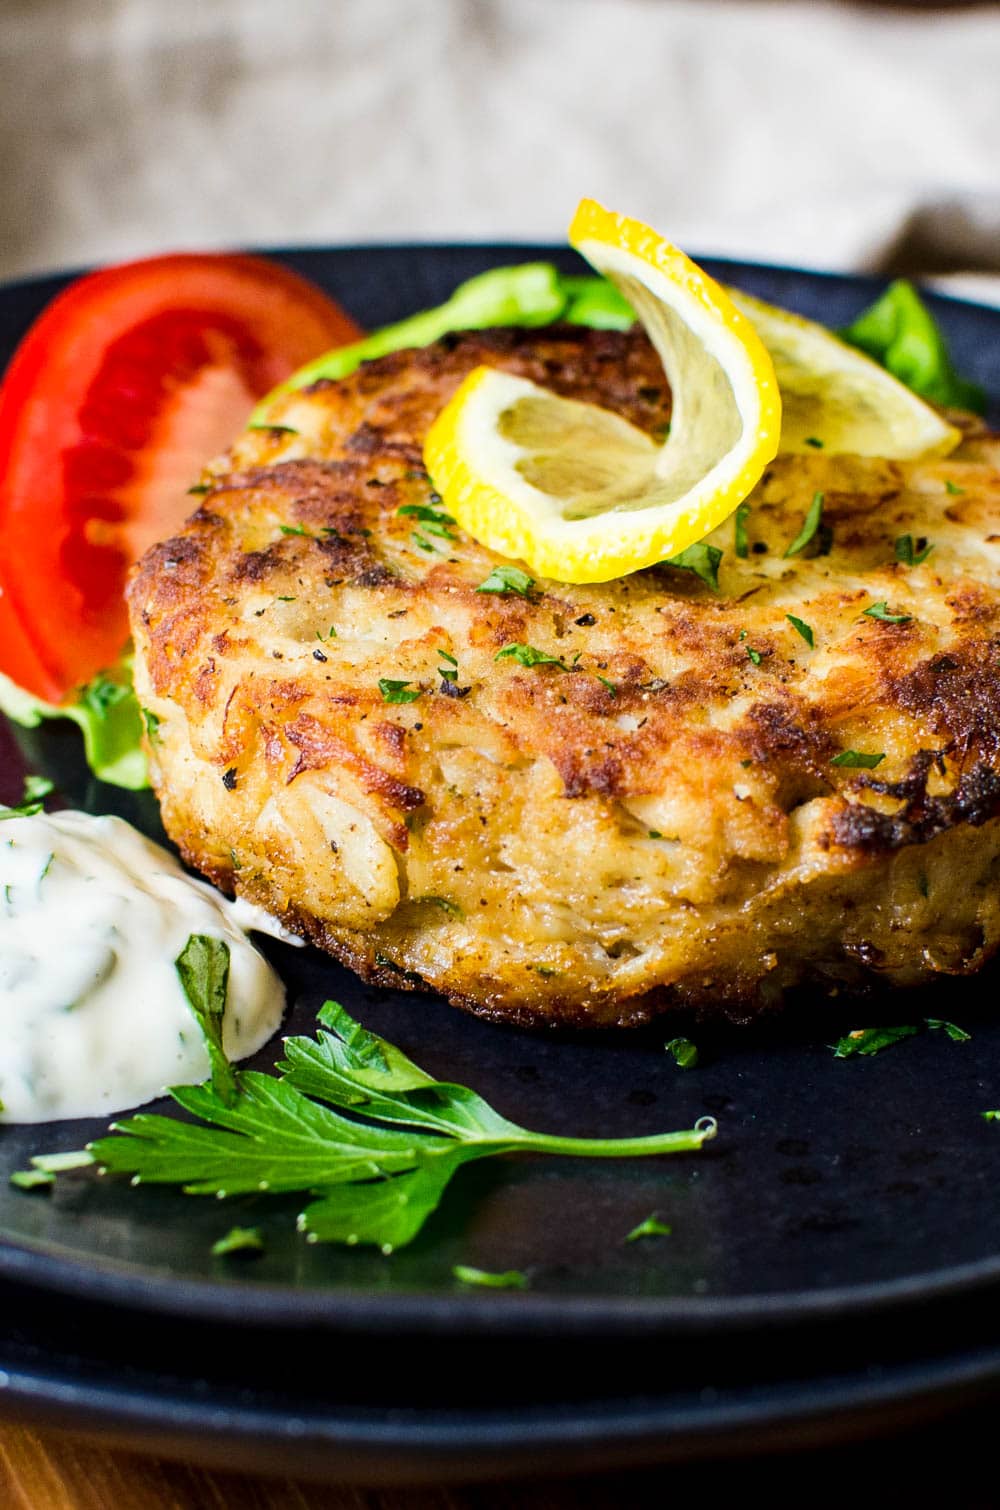 Northern Neck Crab Cakes with tartar sauce and lemon.